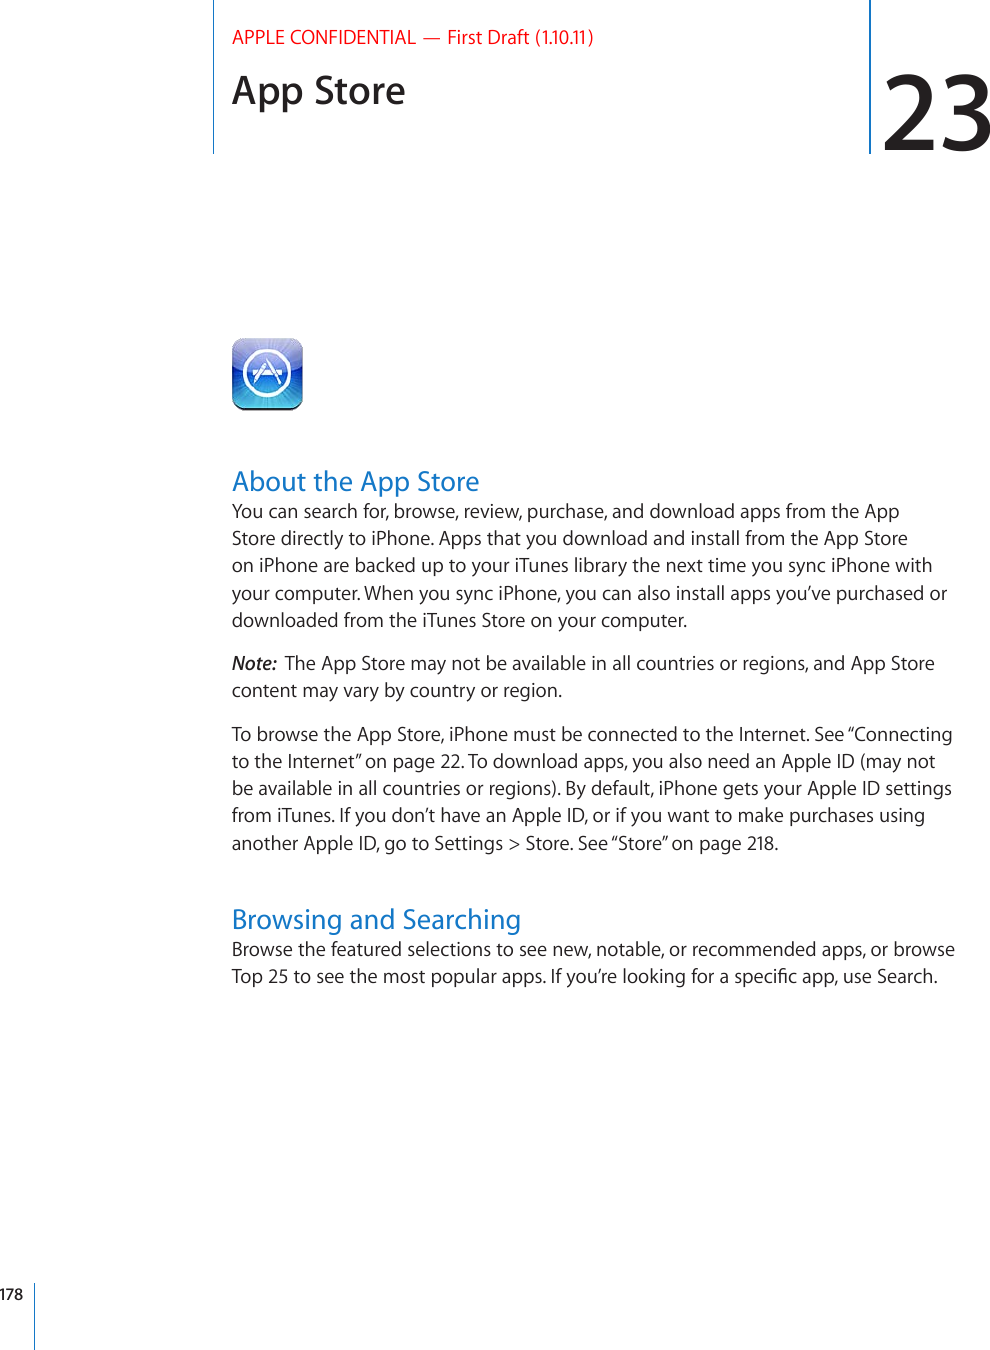 App Store 23APPLE CONFIDENTIAL — First Draft (1.10.11)About the App StoreYou can search for, browse, review, purchase, and download apps from the App Store directly to iPhone. Apps that you download and install from the App Store on iPhone are backed up to your iTunes library the next time you sync iPhone with your computer. When you sync iPhone, you can also install apps you’ve purchased or downloaded from the iTunes Store on your computer.Note:  The App Store may not be available in all countries or regions, and App Store content may vary by country or region.To browse the App Store, iPhone must be connected to the Internet. See “Connecting to the Internet” on page 22. To download apps, you also need an Apple ID (may not be available in all countries or regions). By default, iPhone gets your Apple ID settings from iTunes. If you don’t have an Apple ID, or if you want to make purchases using another Apple ID, go to Settings &gt; Store. See “Store” on page 218.Browsing and SearchingBrowse the featured selections to see new, notable, or recommended apps, or browse 6QRVQUGGVJGOQUVRQRWNCTCRRU+H[QW¨TGNQQMKPIHQTCURGEK°ECRRWUG5GCTEJ178